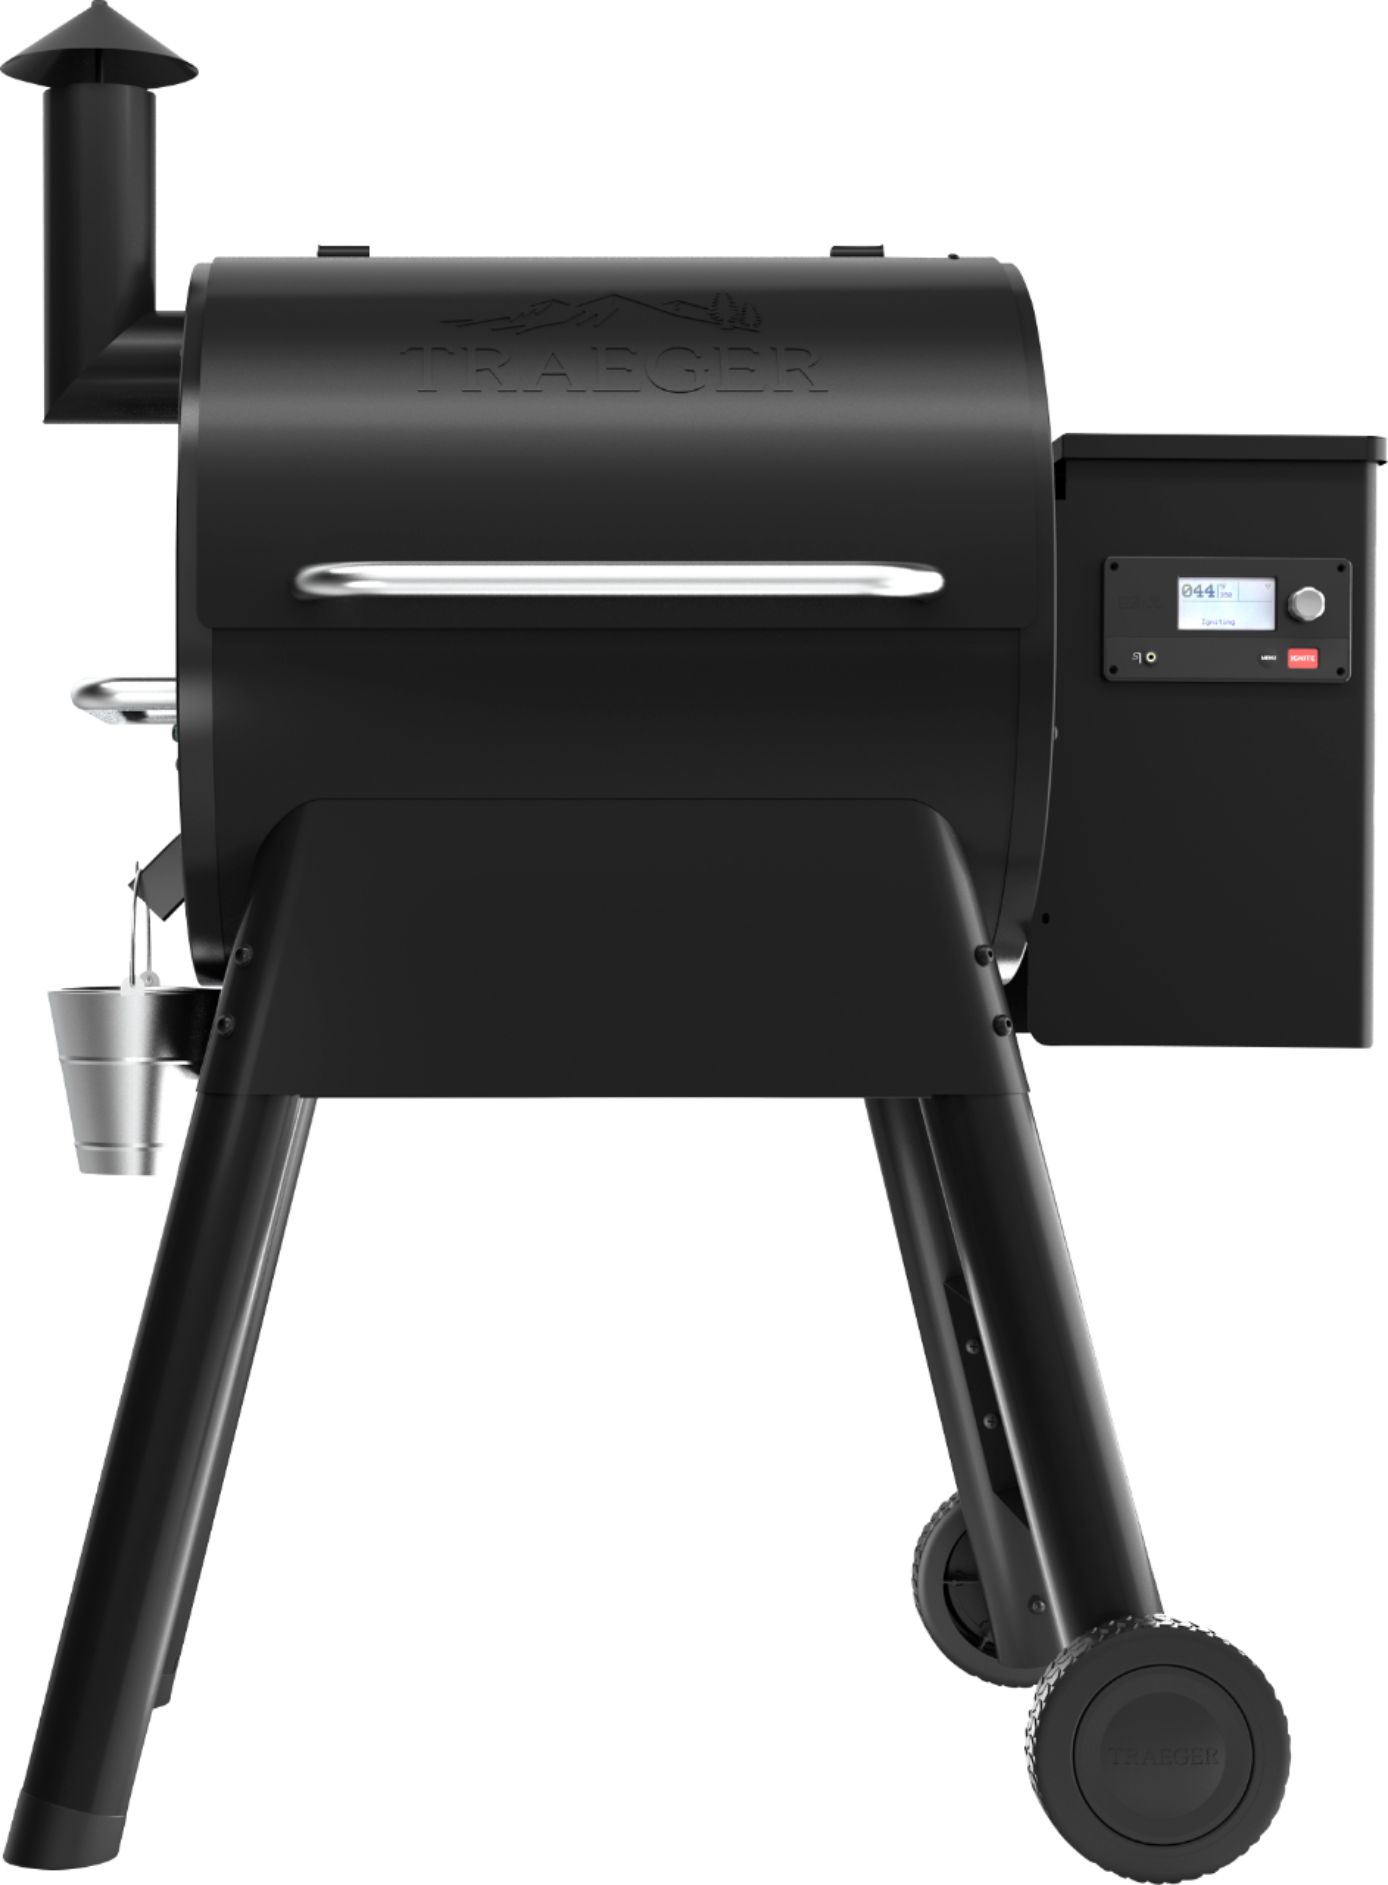  Traeger Grills Ranger Portable Wood Pellet Grill and Smoker,  Black Small & Grills BAC679 All Natural Cleaner Grill Accessories 946 ml & Traeger  Pellet Grills BAC537 BBQ Cleaning Brush Accessory 